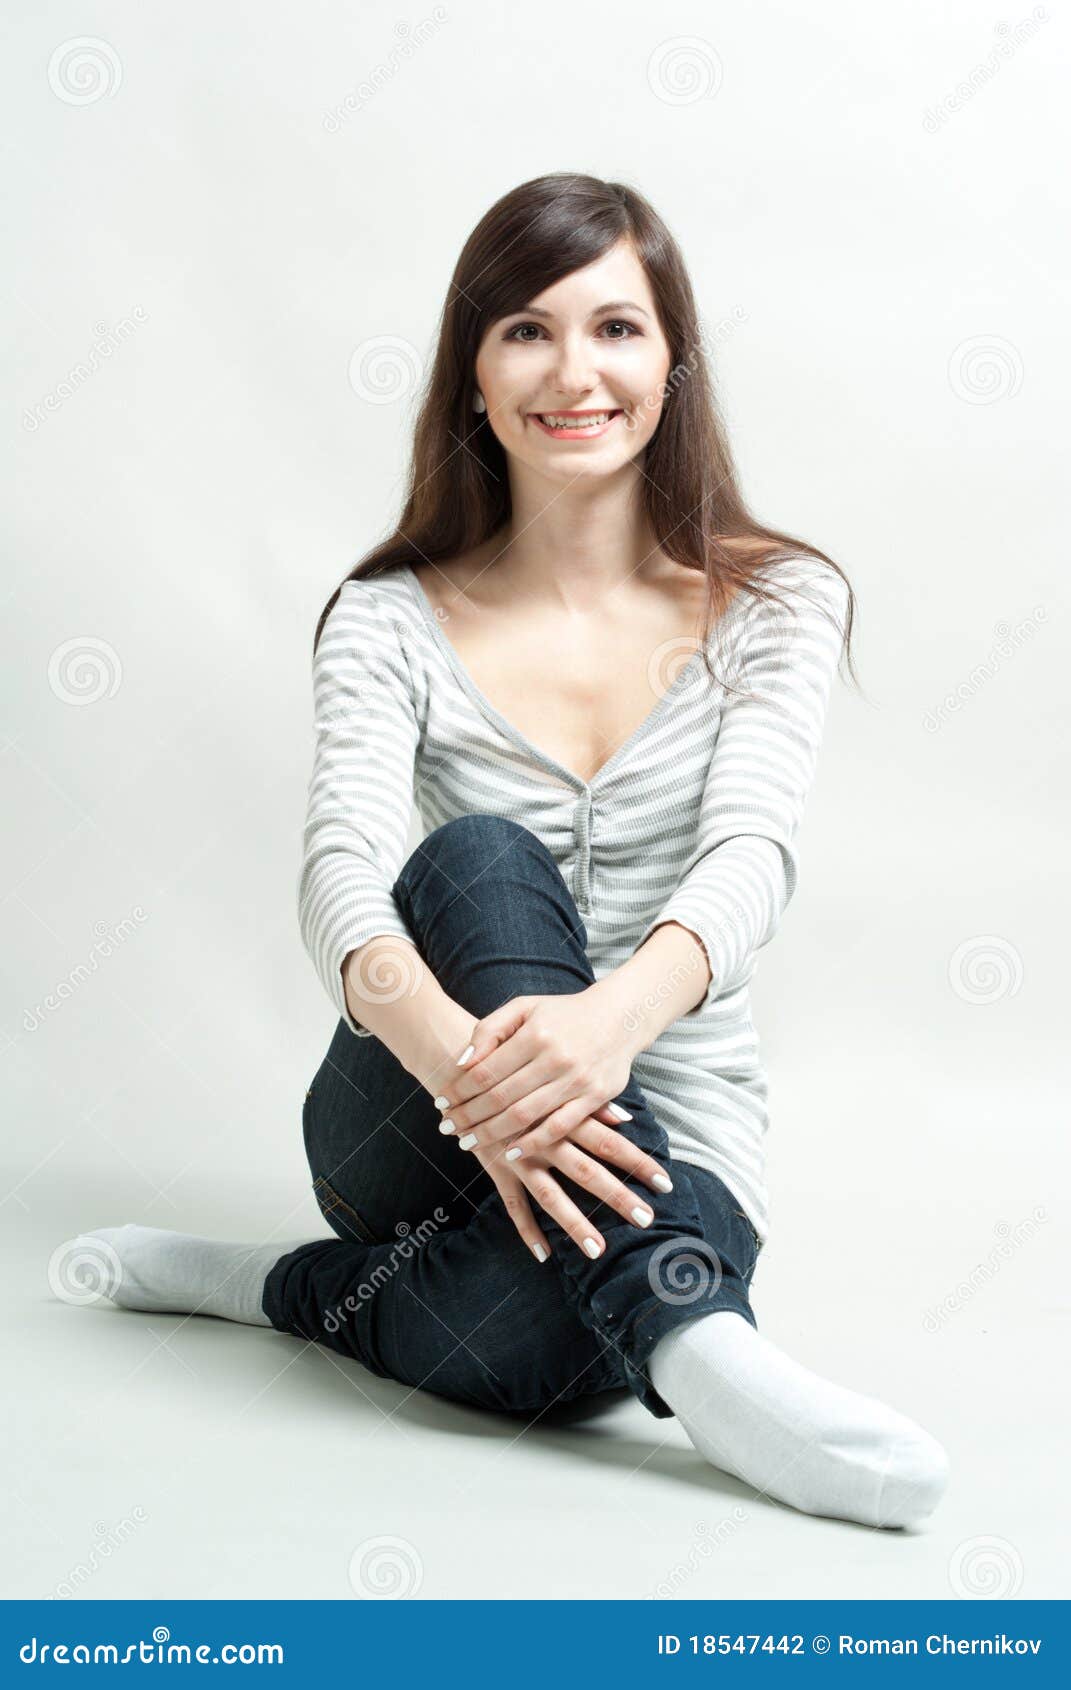 Girl sitting on a floor stock photo. Image of brown, smiling - 18547442